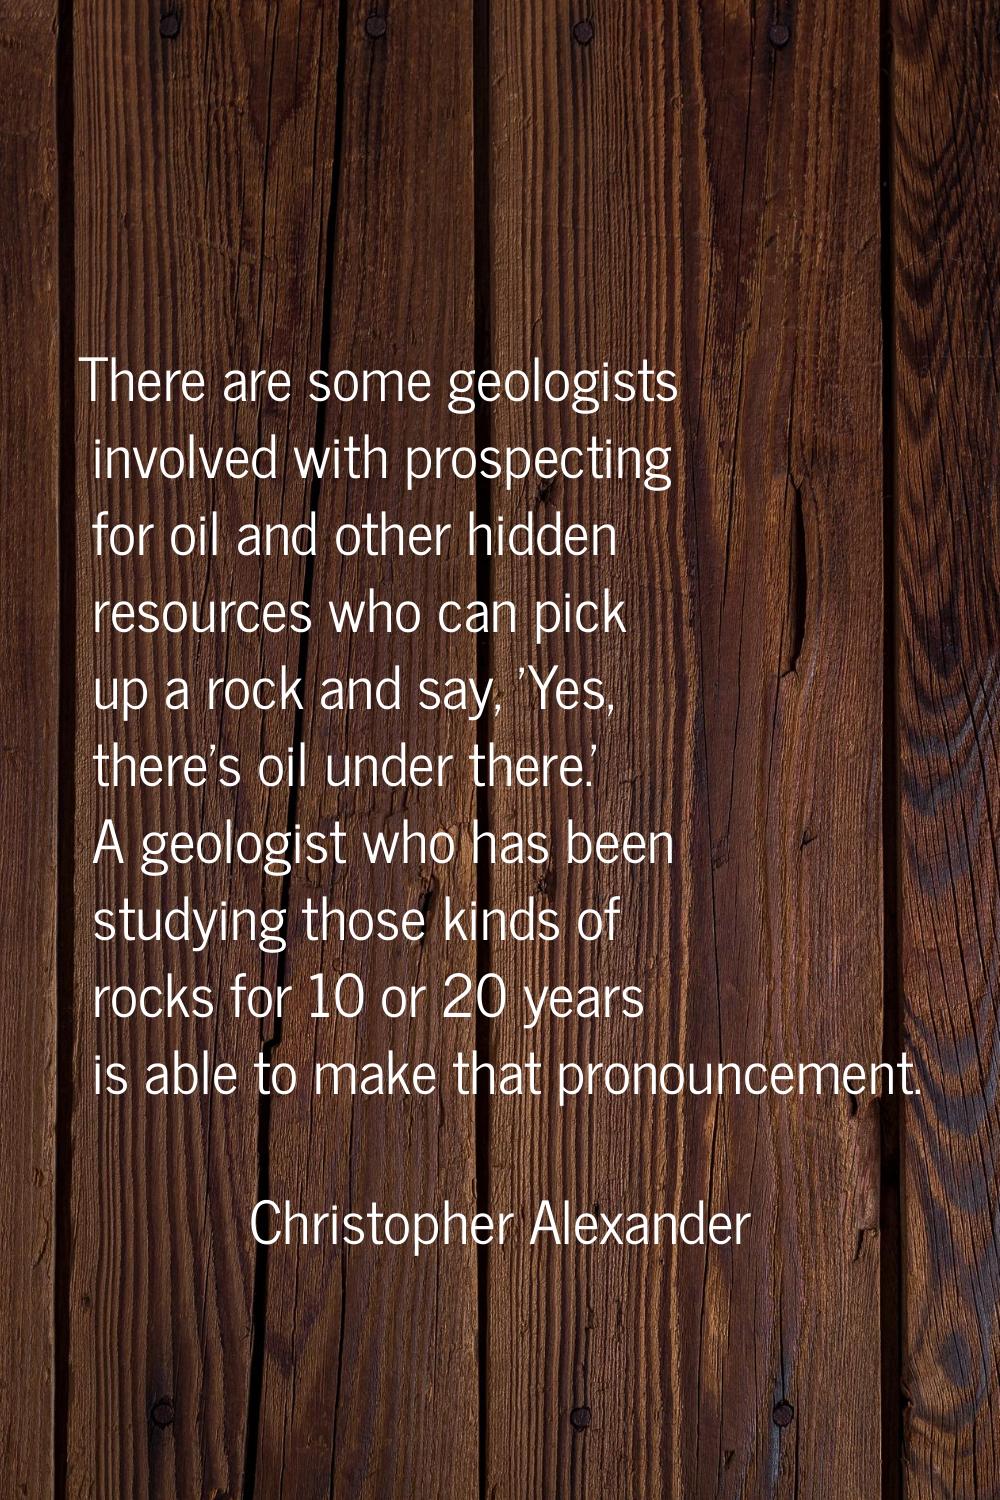 There are some geologists involved with prospecting for oil and other hidden resources who can pick